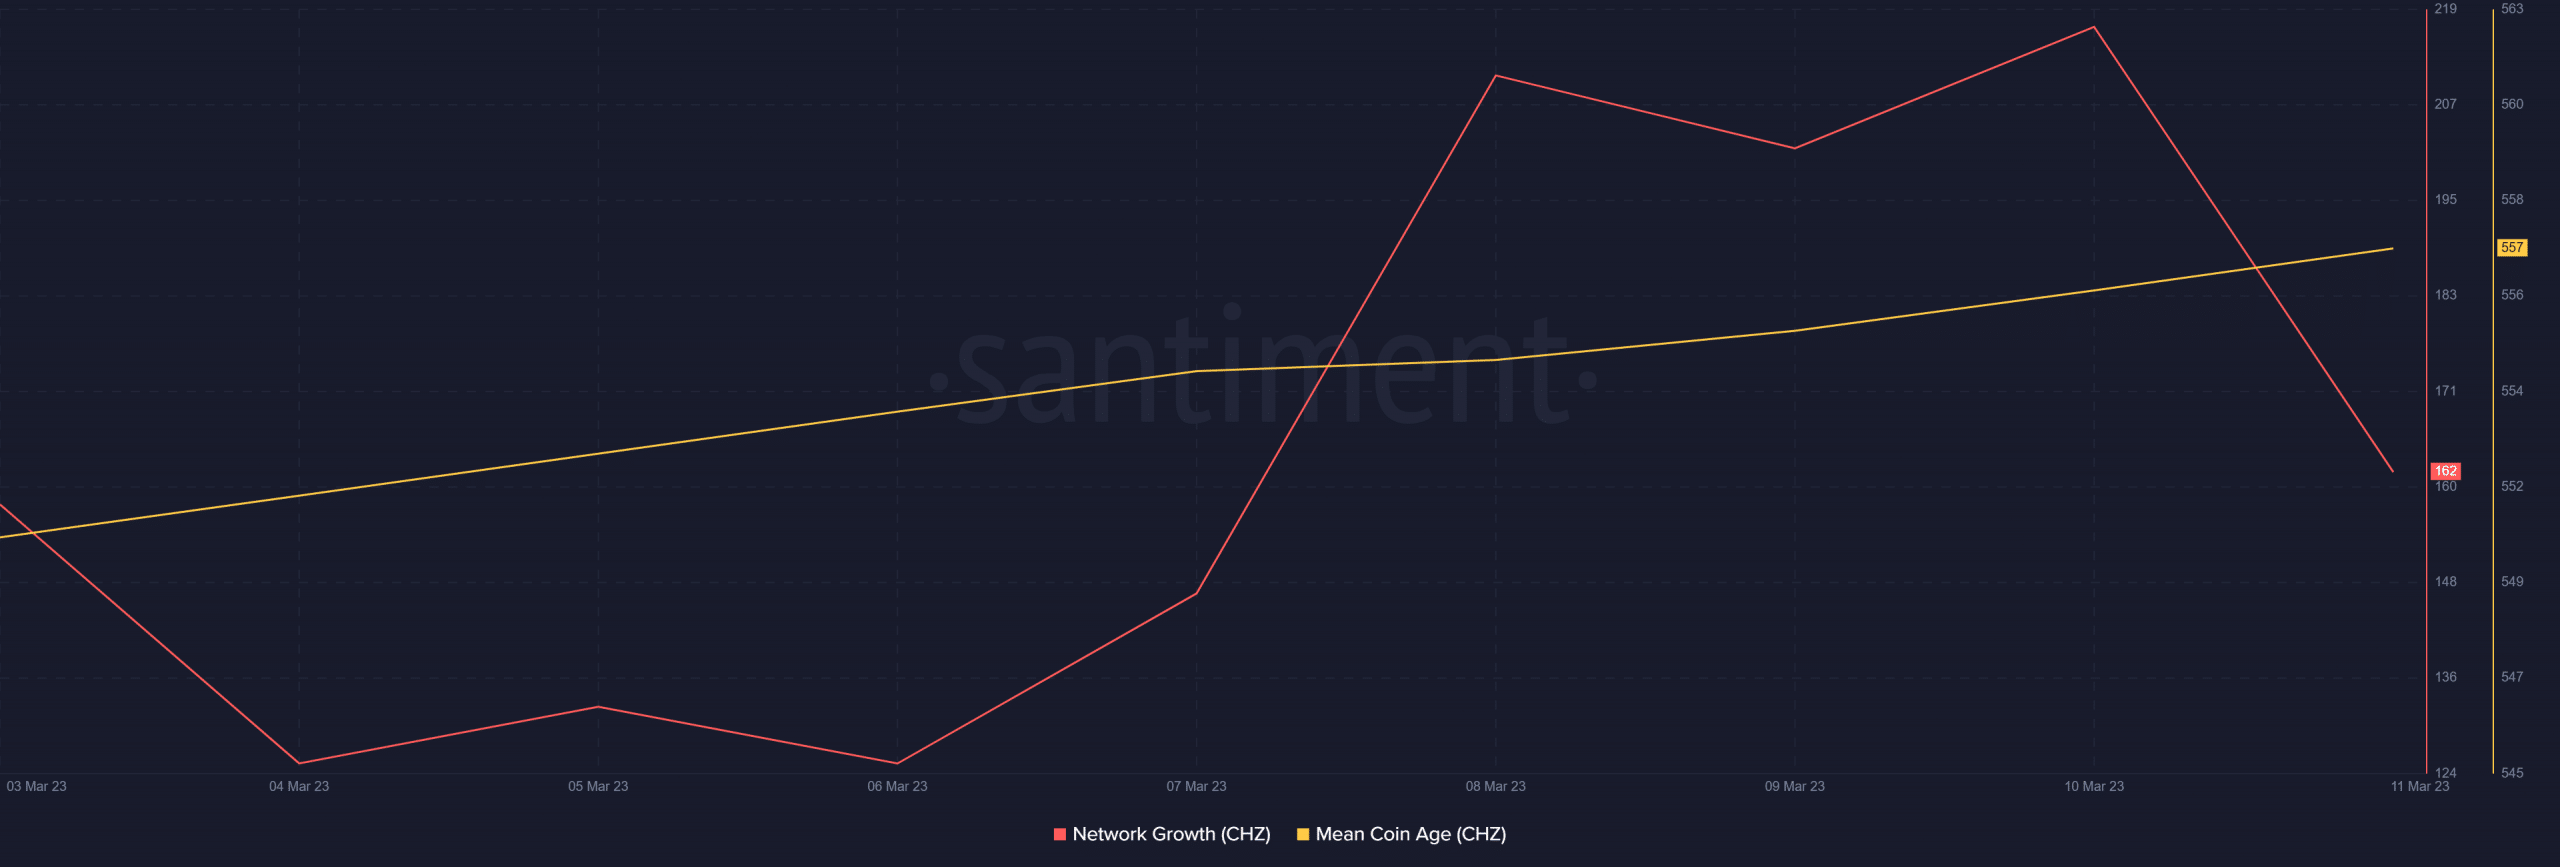 Chiliz network growth and mean coin age